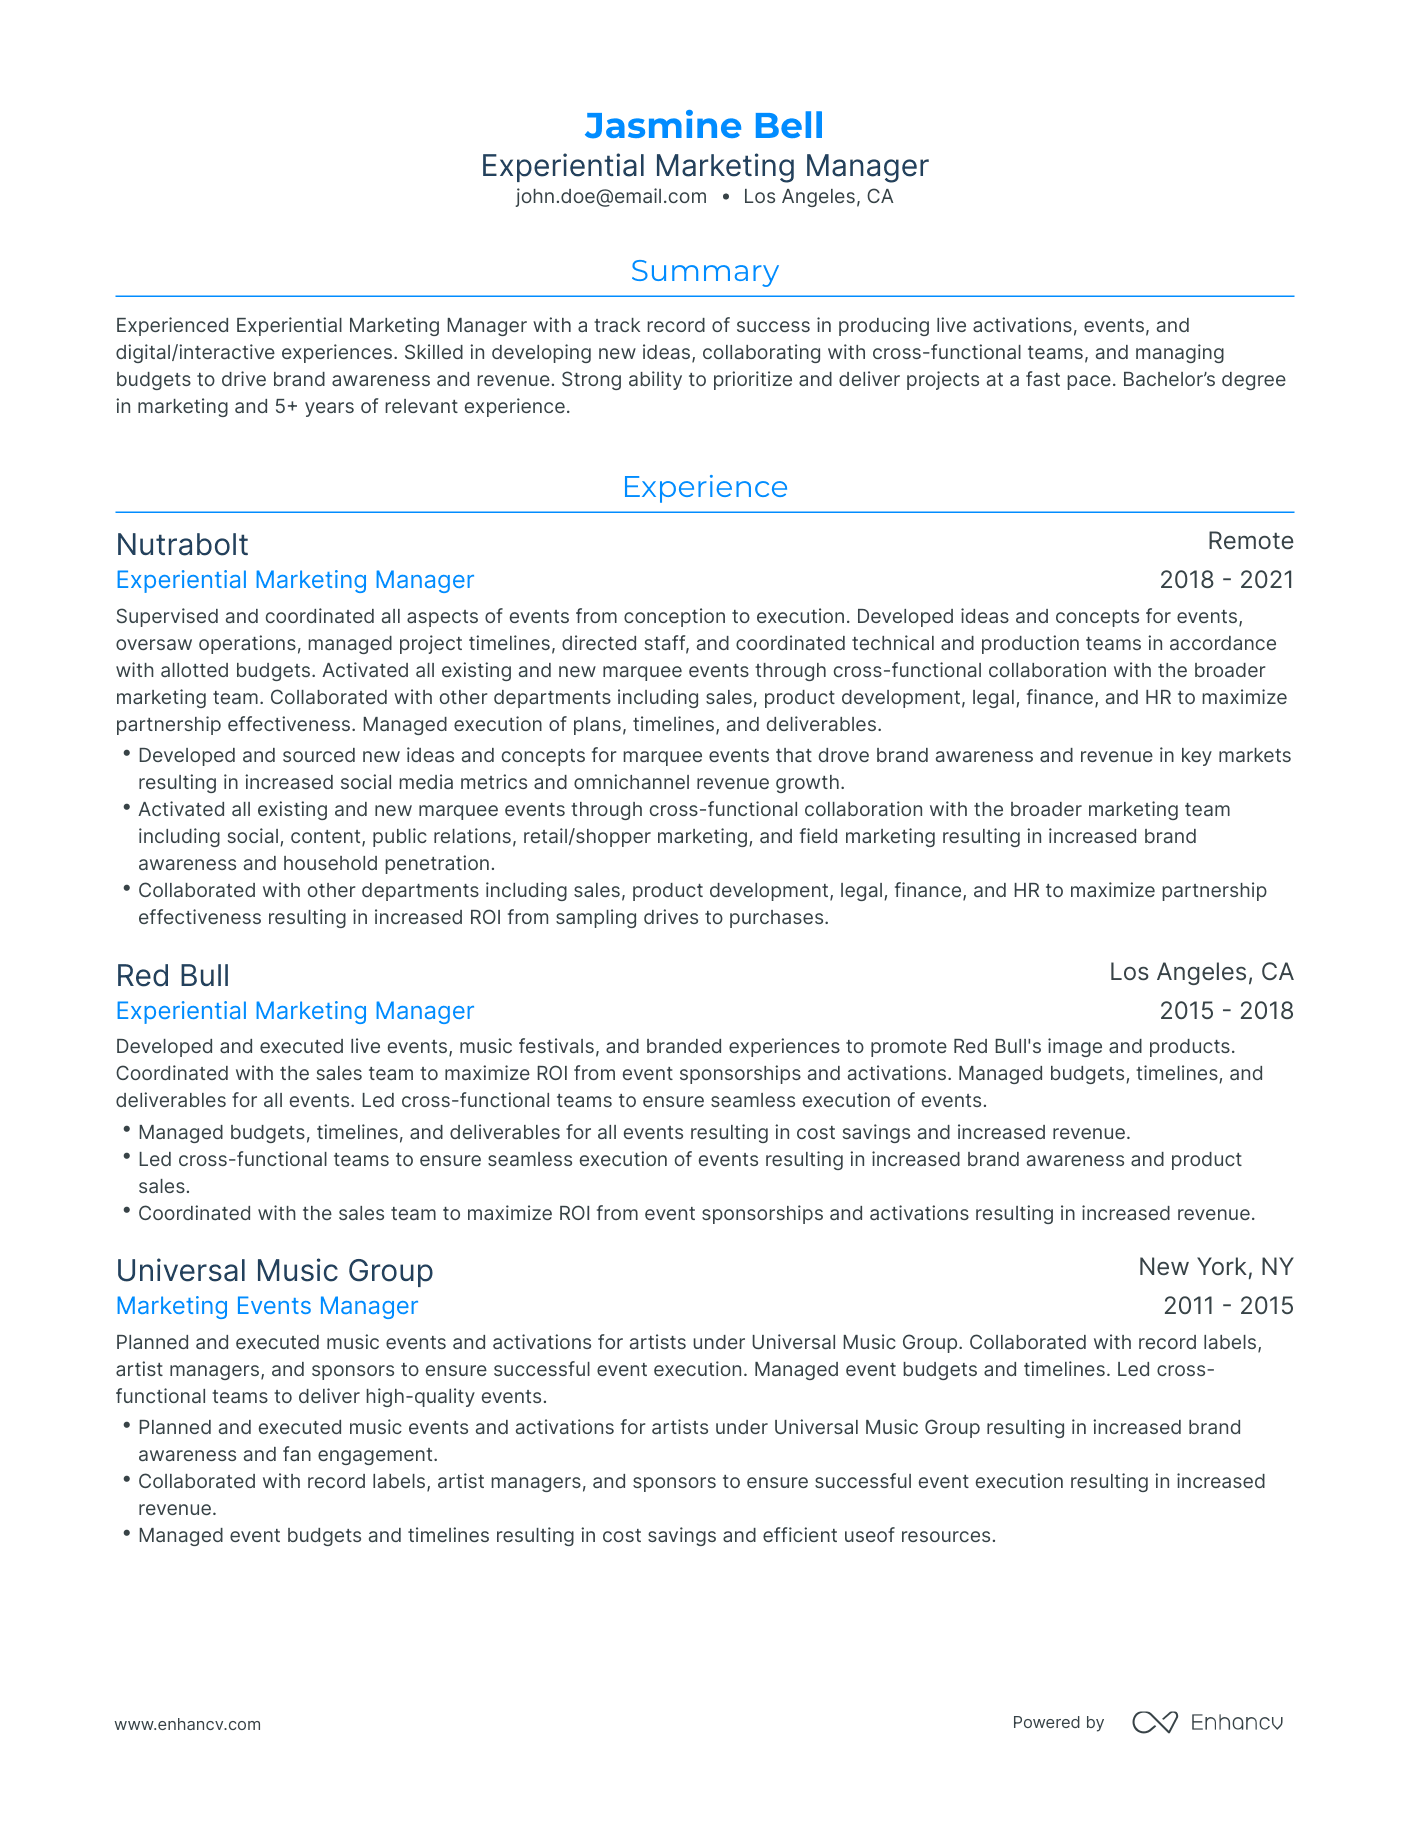 Traditional Experiential Marketing Resume Template